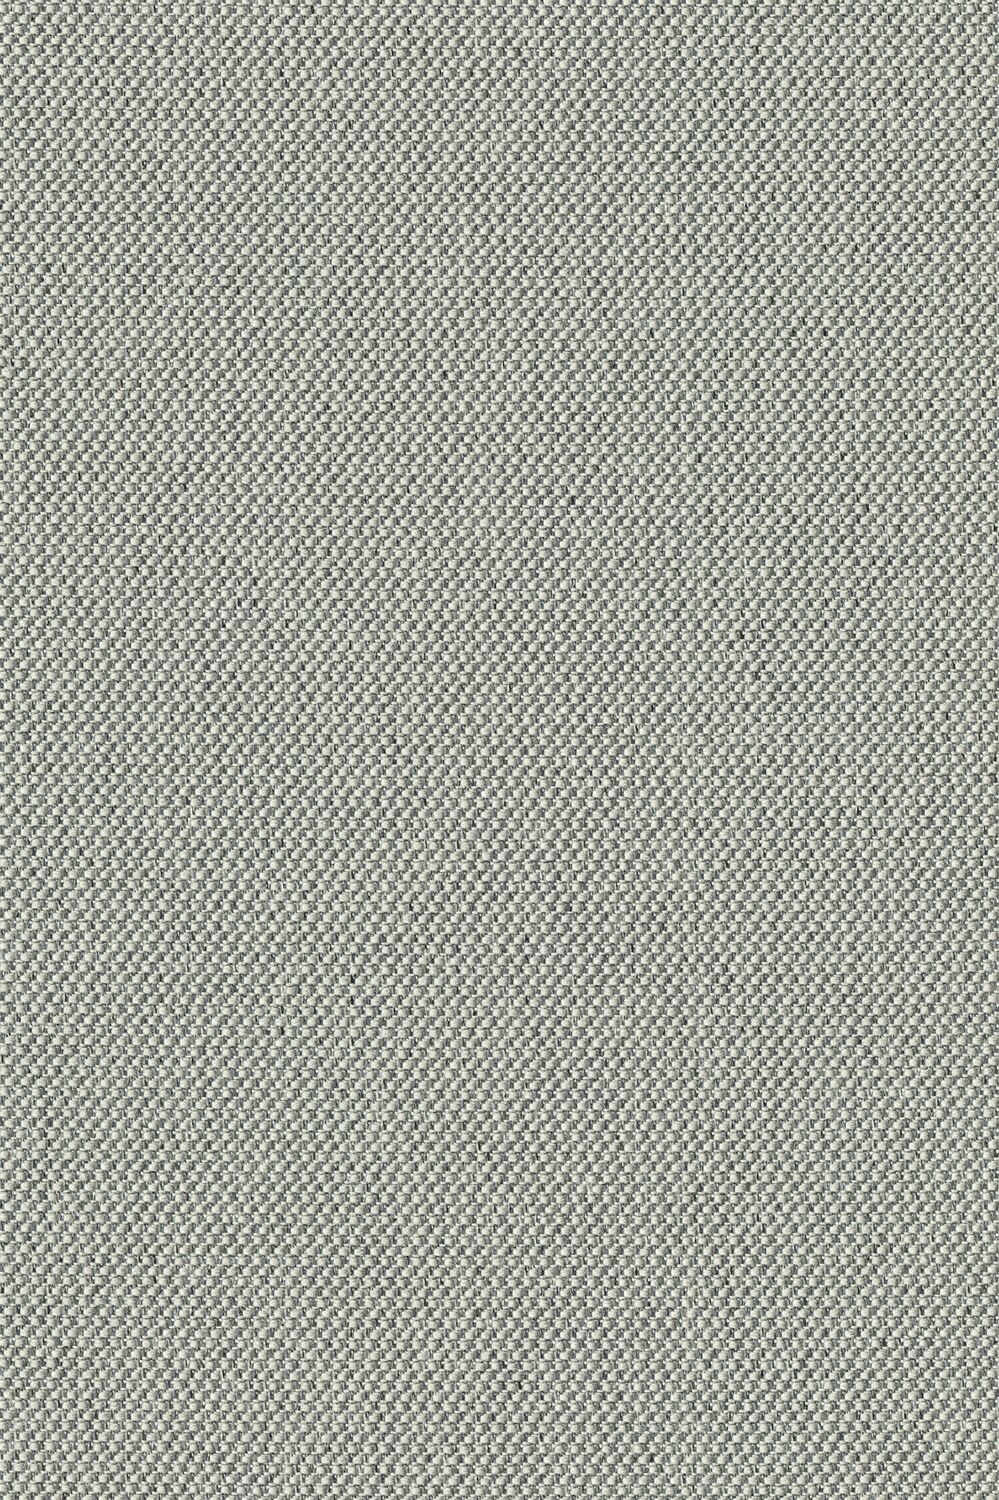 Biotope - Marine Snow - 4113 - 05 - Half Yard Tileable Swatches